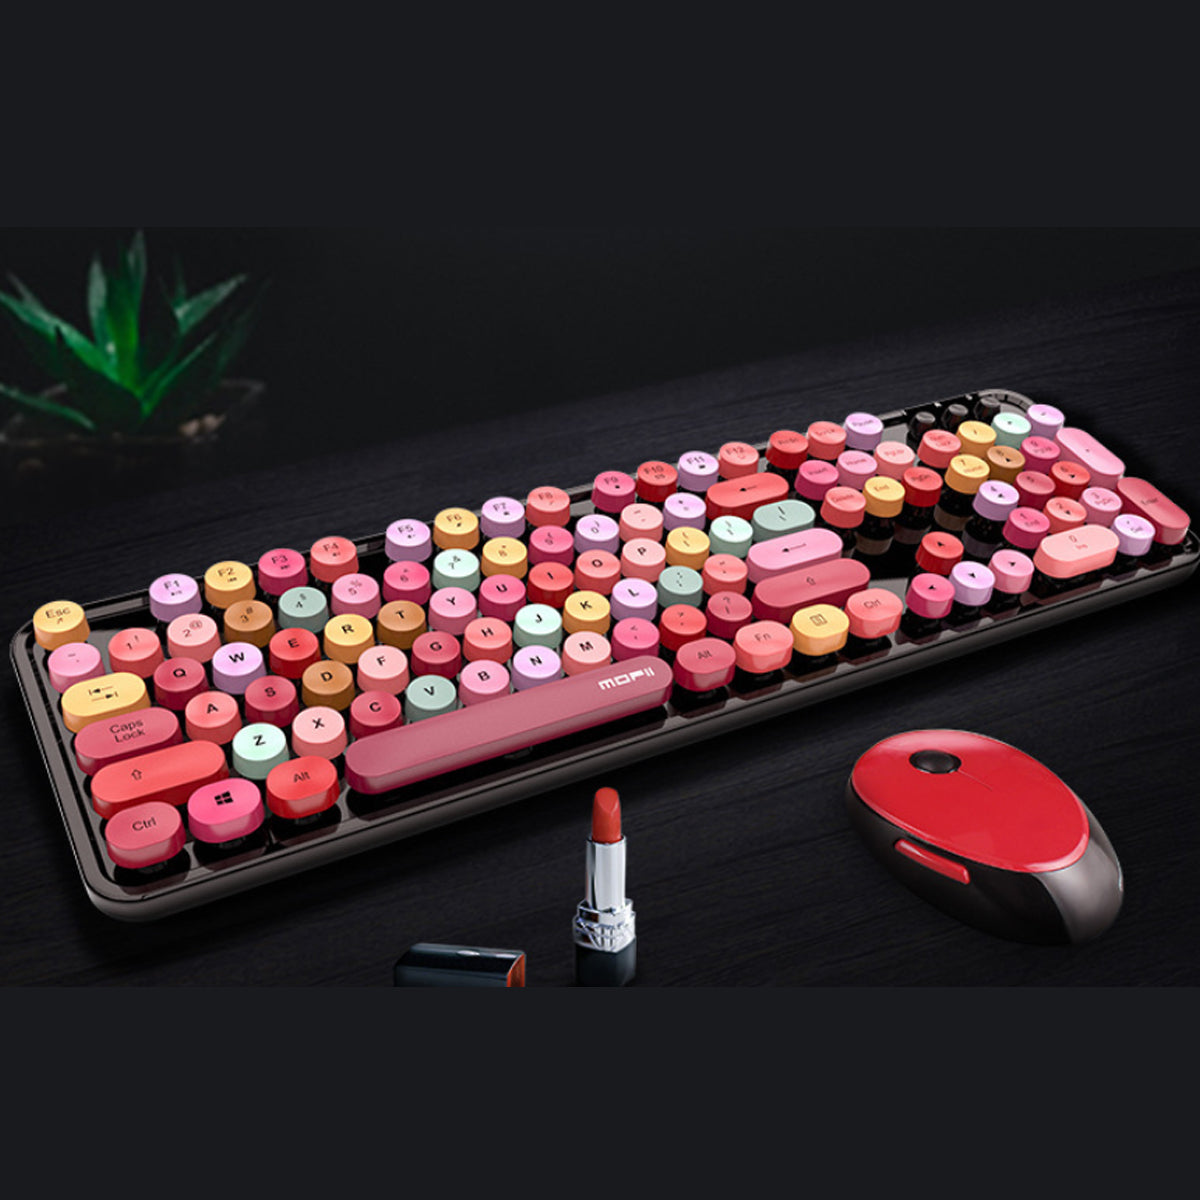 Spring Multi Wireless Keyboard And Mouse Set by VistaShops